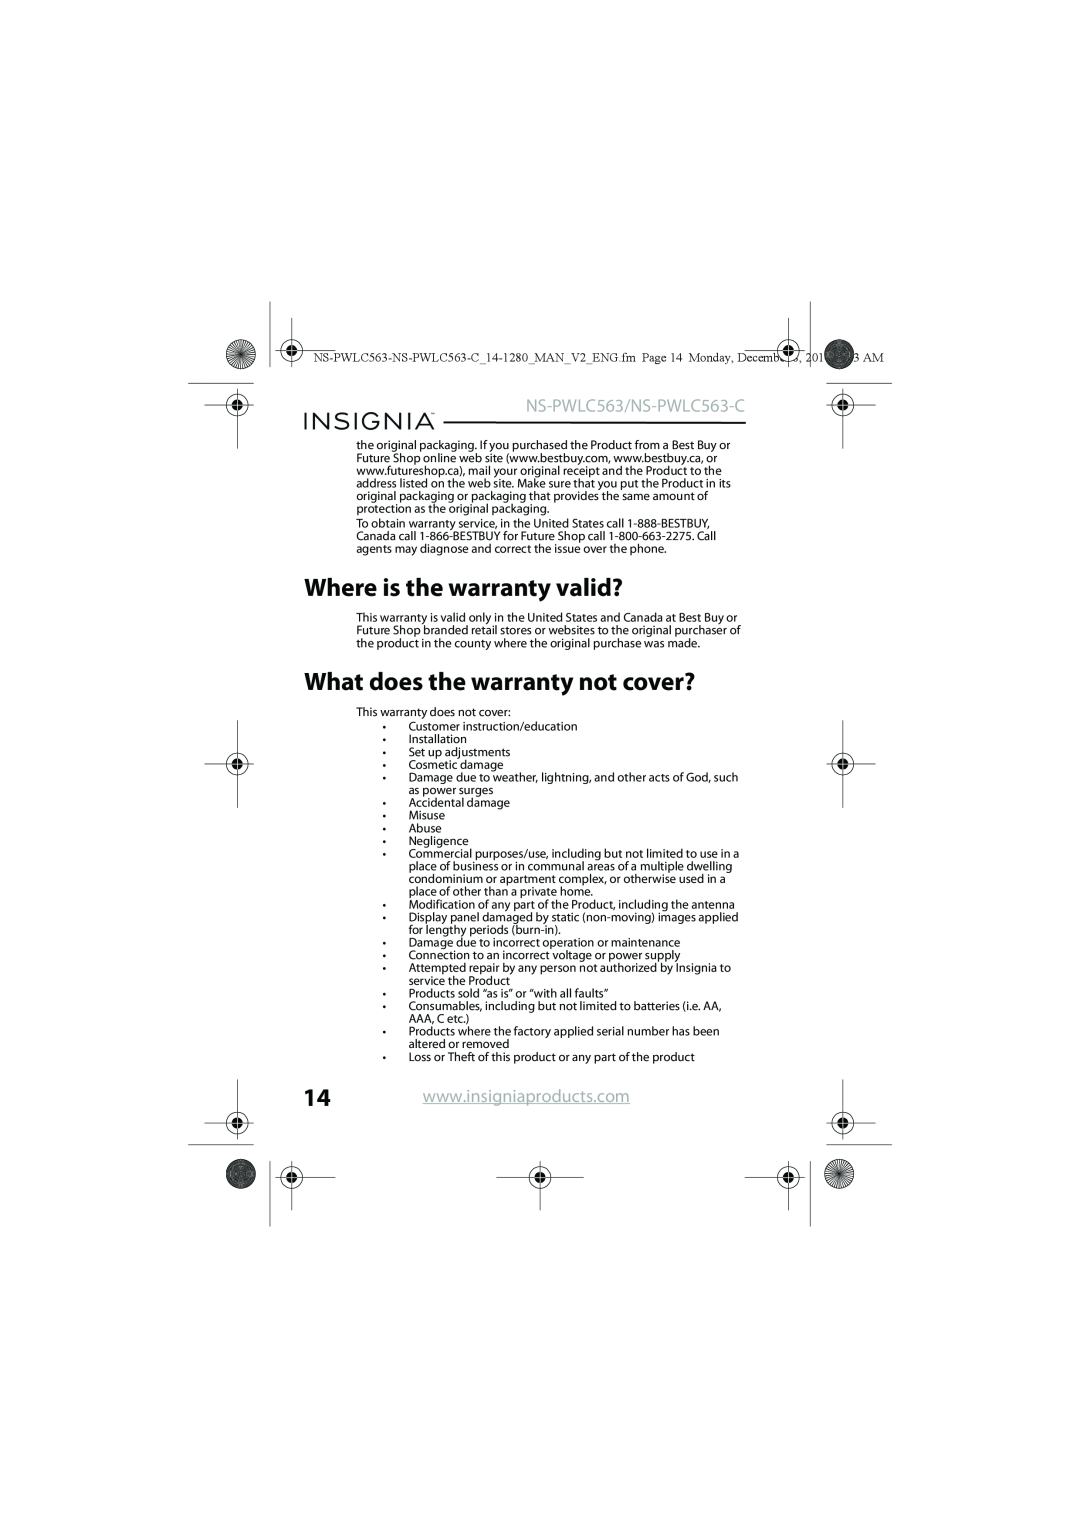 Insignia manual Where is the warranty valid?, What does the warranty not cover?, NS-PWLC563/NS-PWLC563-C 